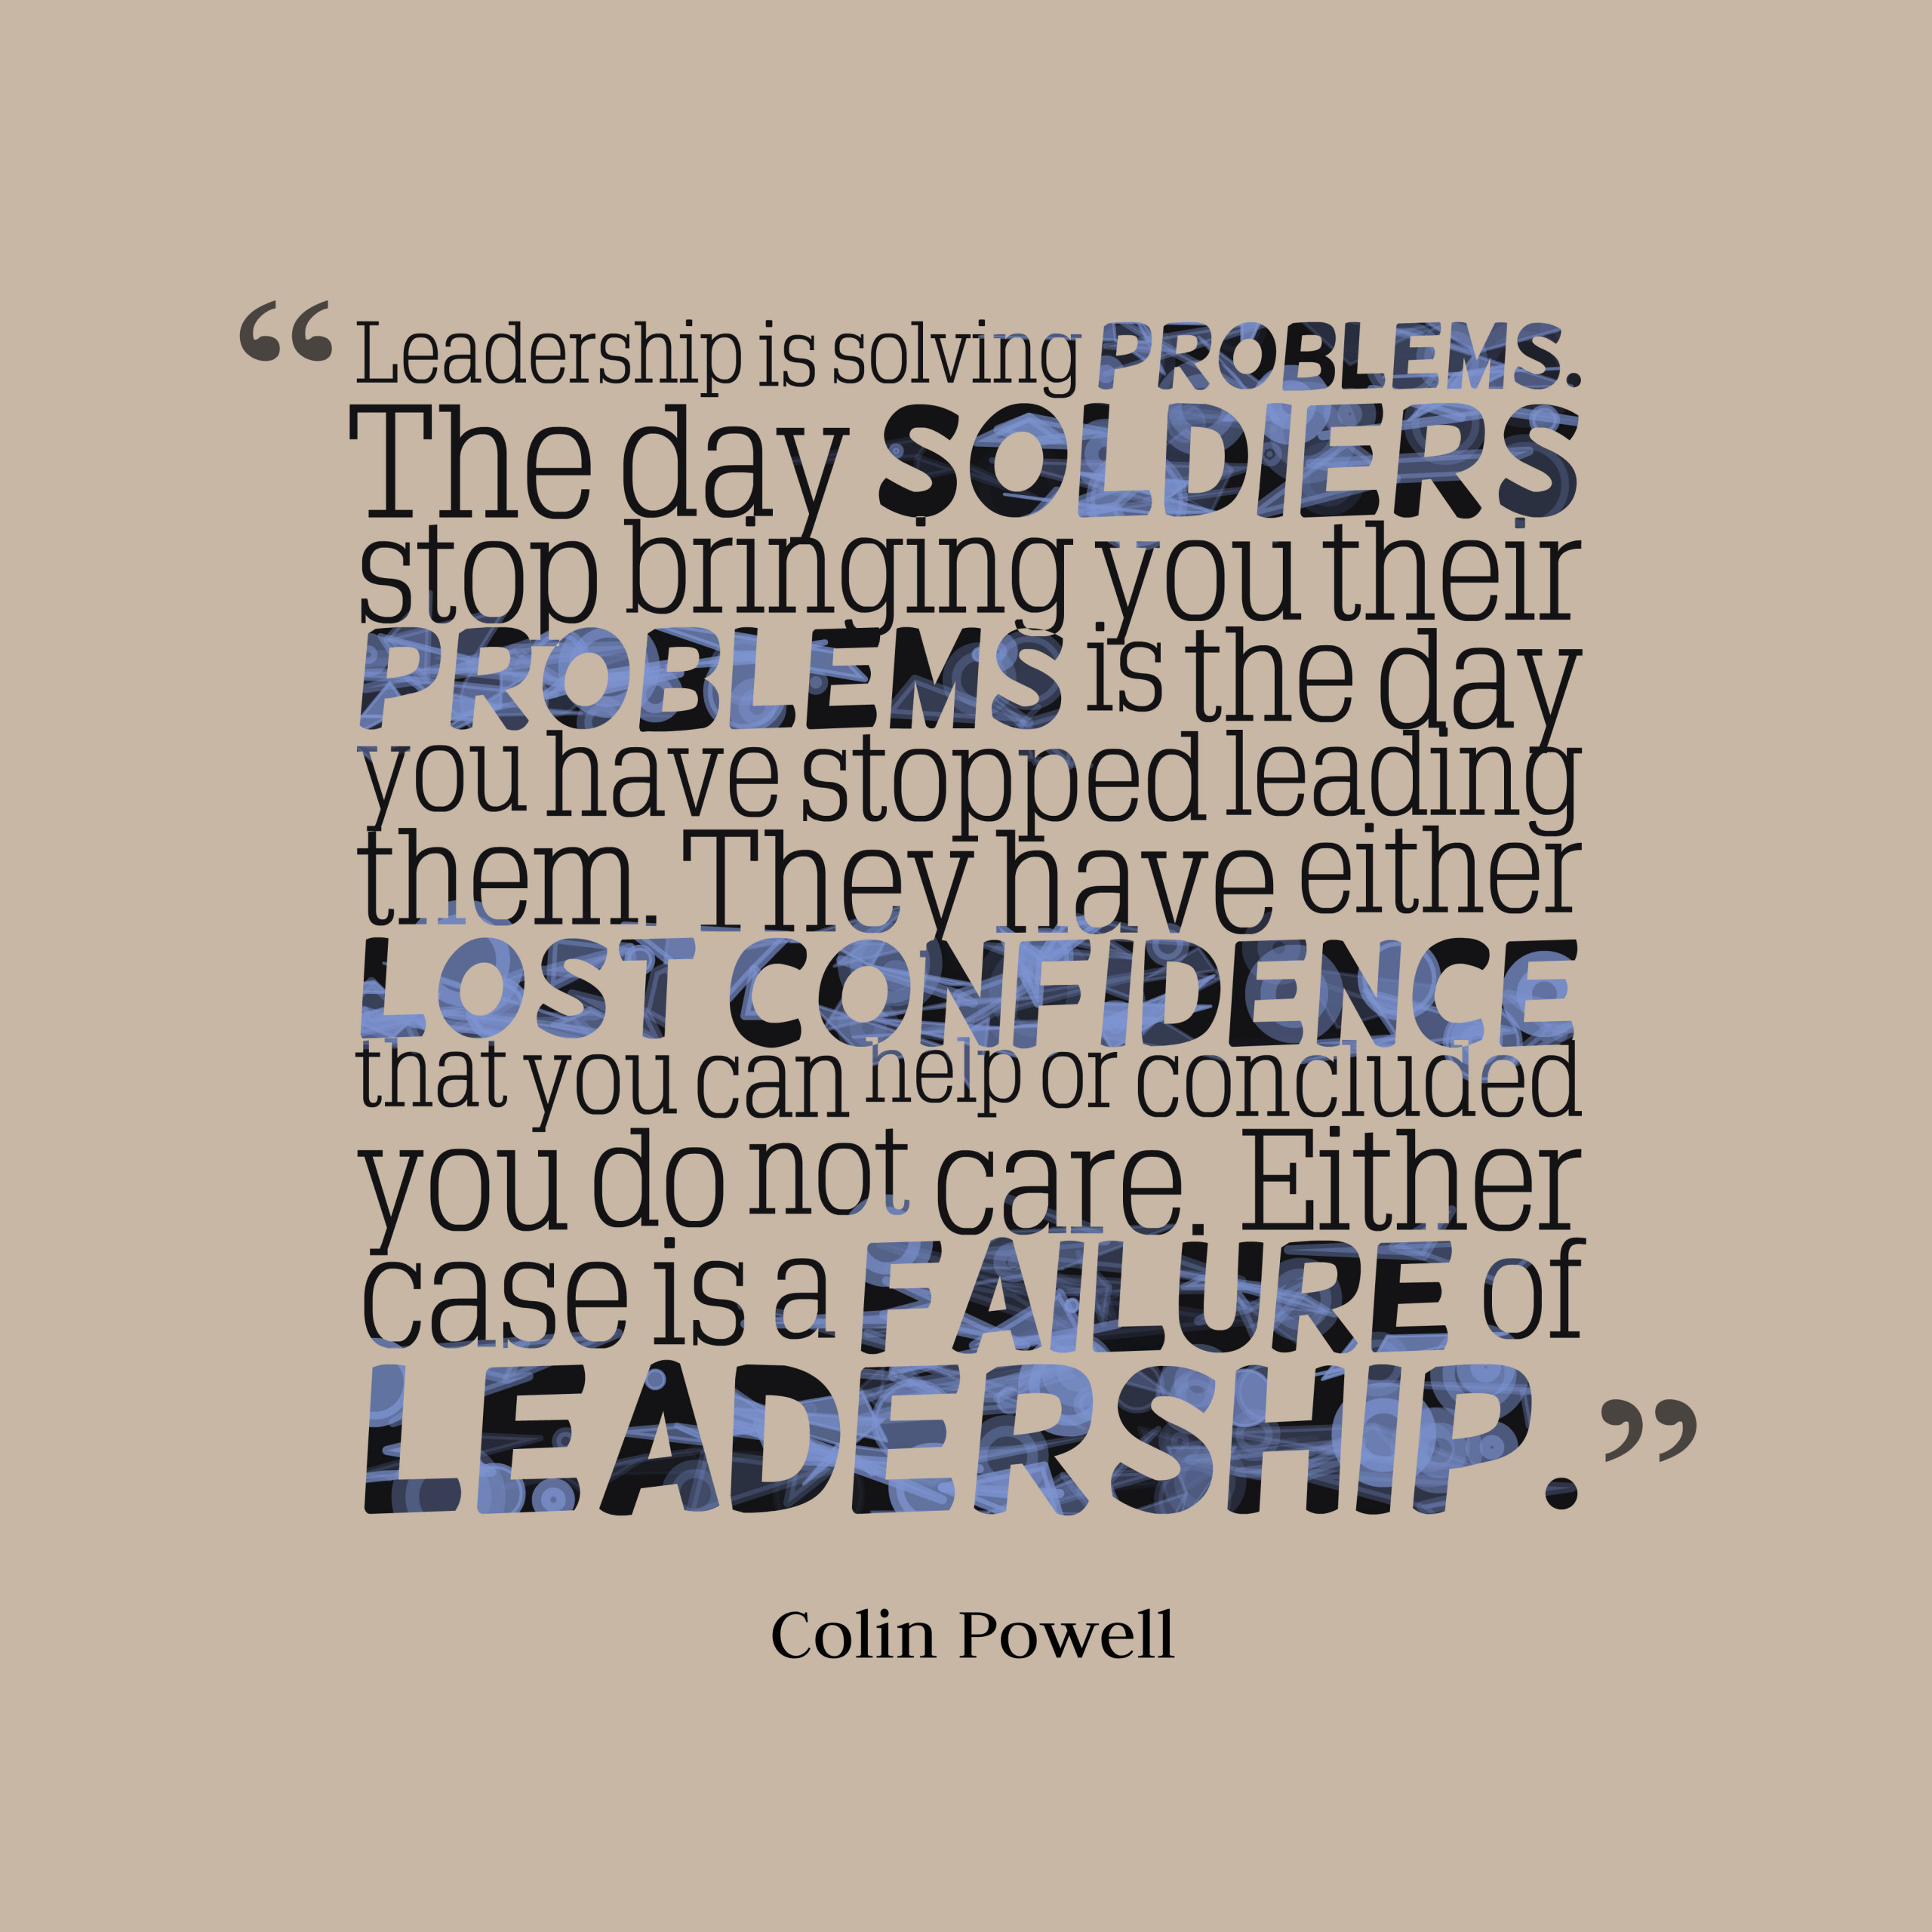 Colin Powell Quote Leadership
 Get high resolution using text from Colin Powell quote